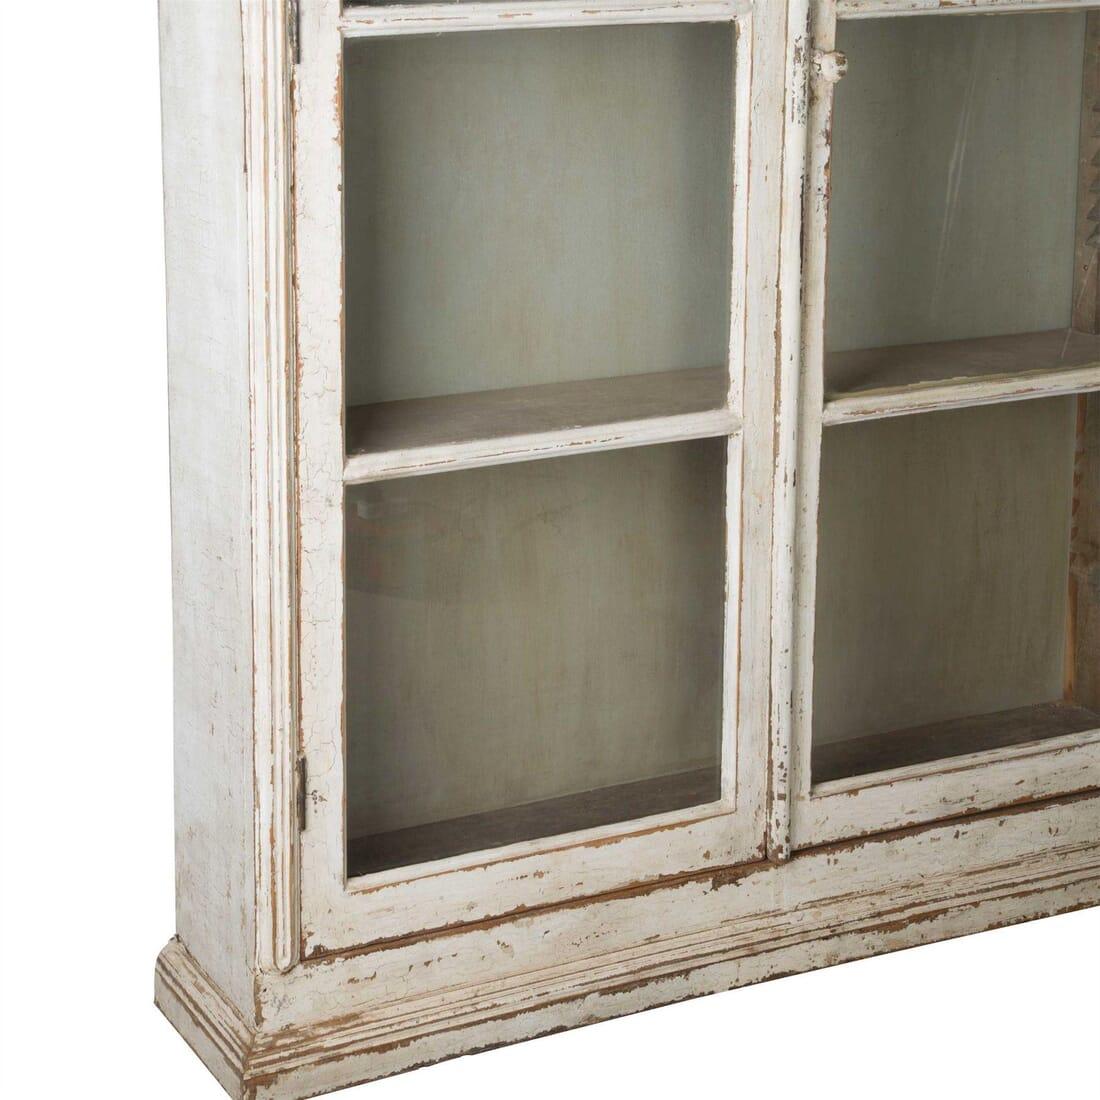 Large French painted vitrine / display cabinet, circa 1900.